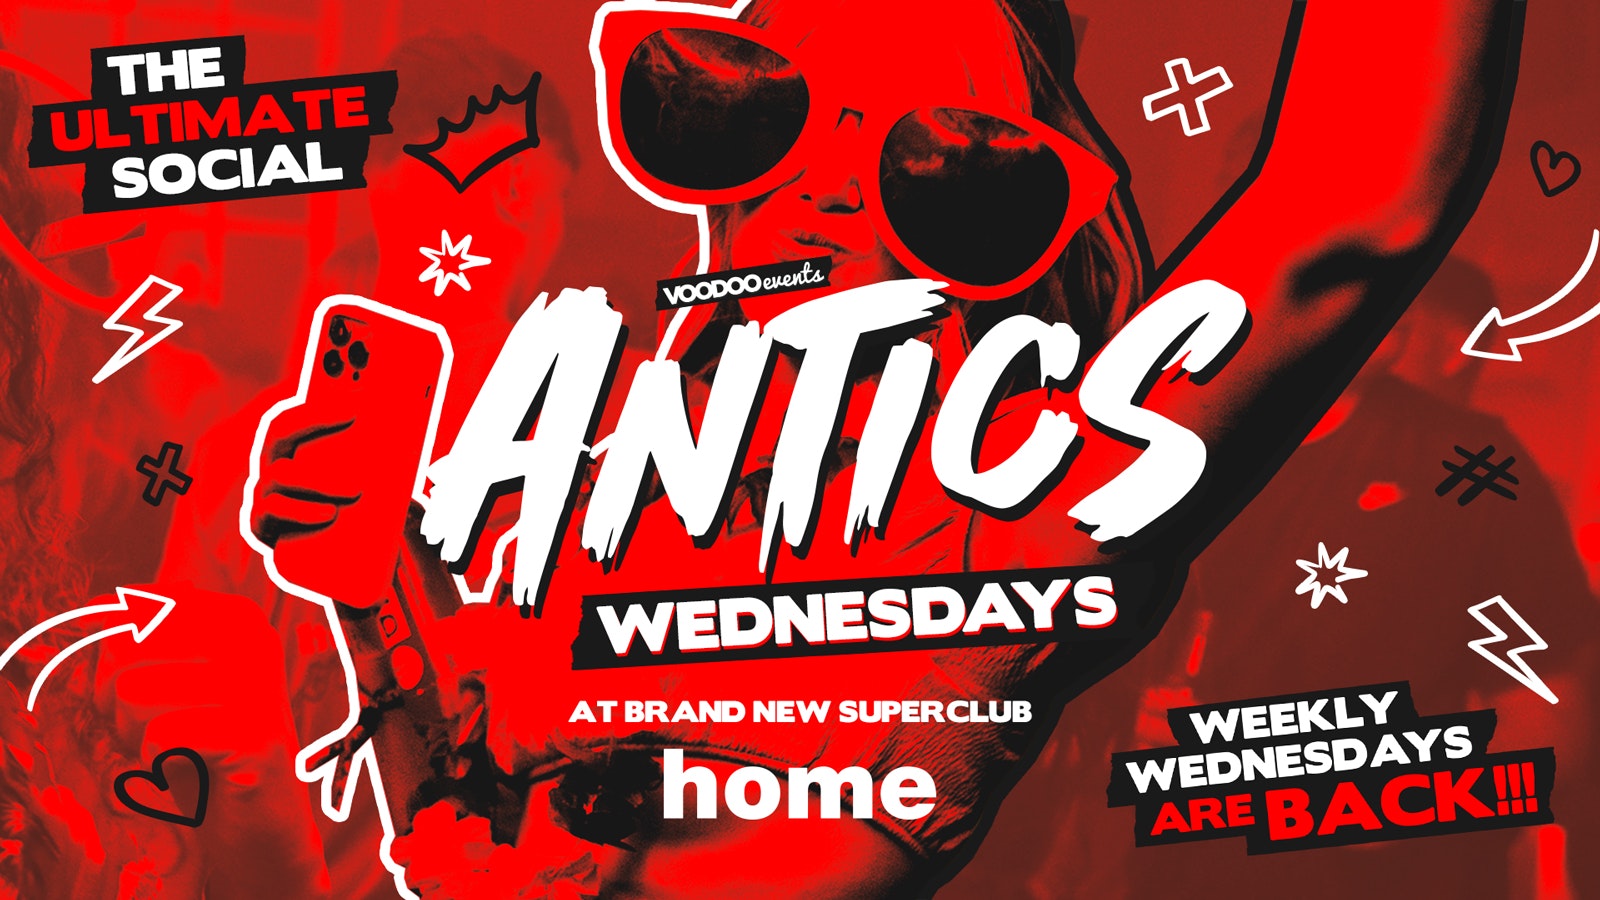 Antics @ THE BRAND NEW SUPER CLUB HOME – Wednesday 3rd July